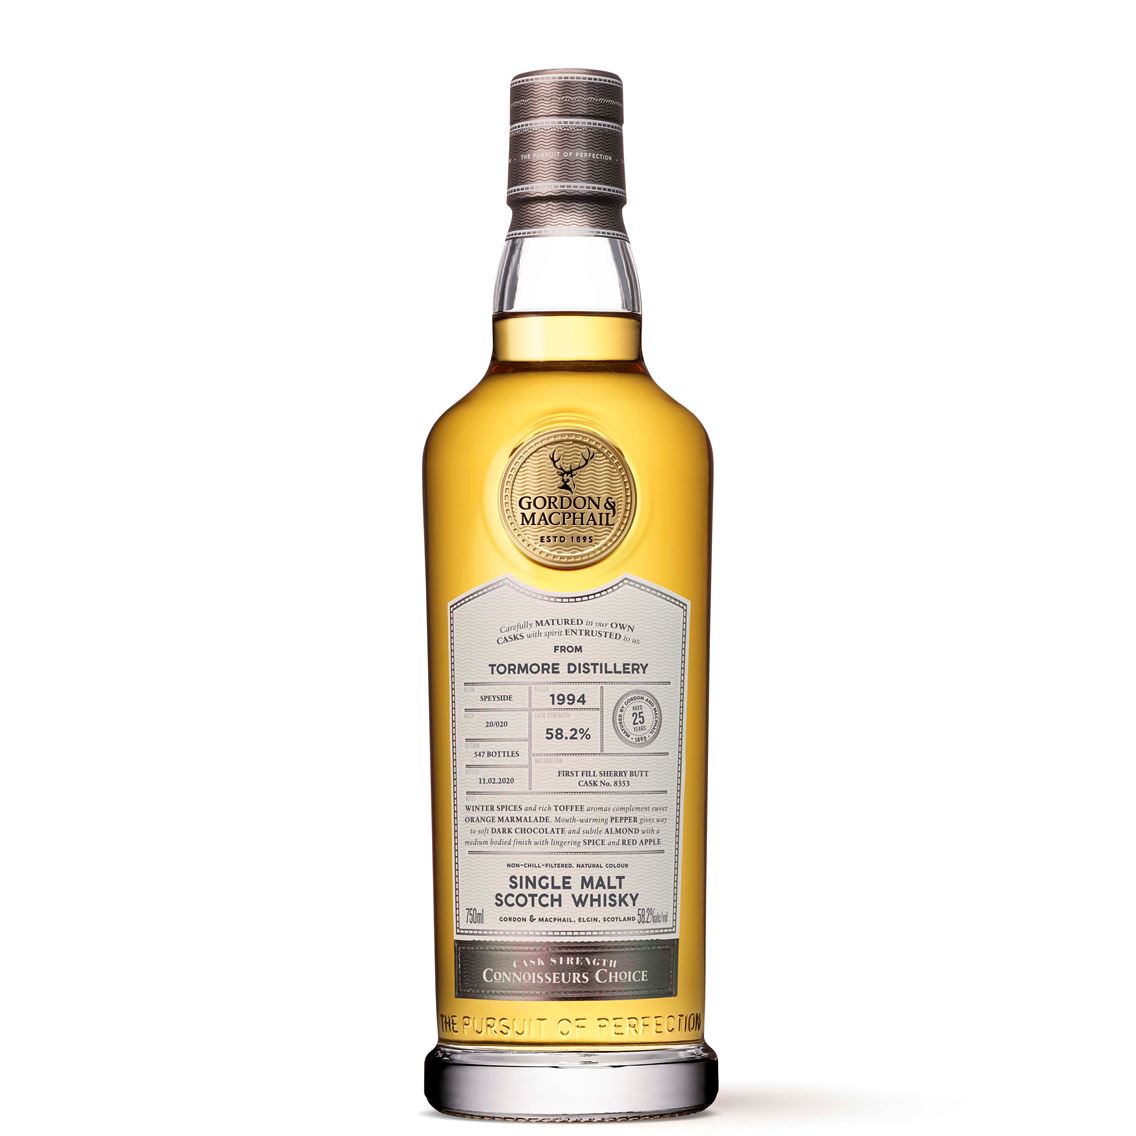 Gordon & MacPhail Tormore Distillery 1994 Connoisseurs Choice 750mL a tall clear bottle with a white label and golden emblem and silver top